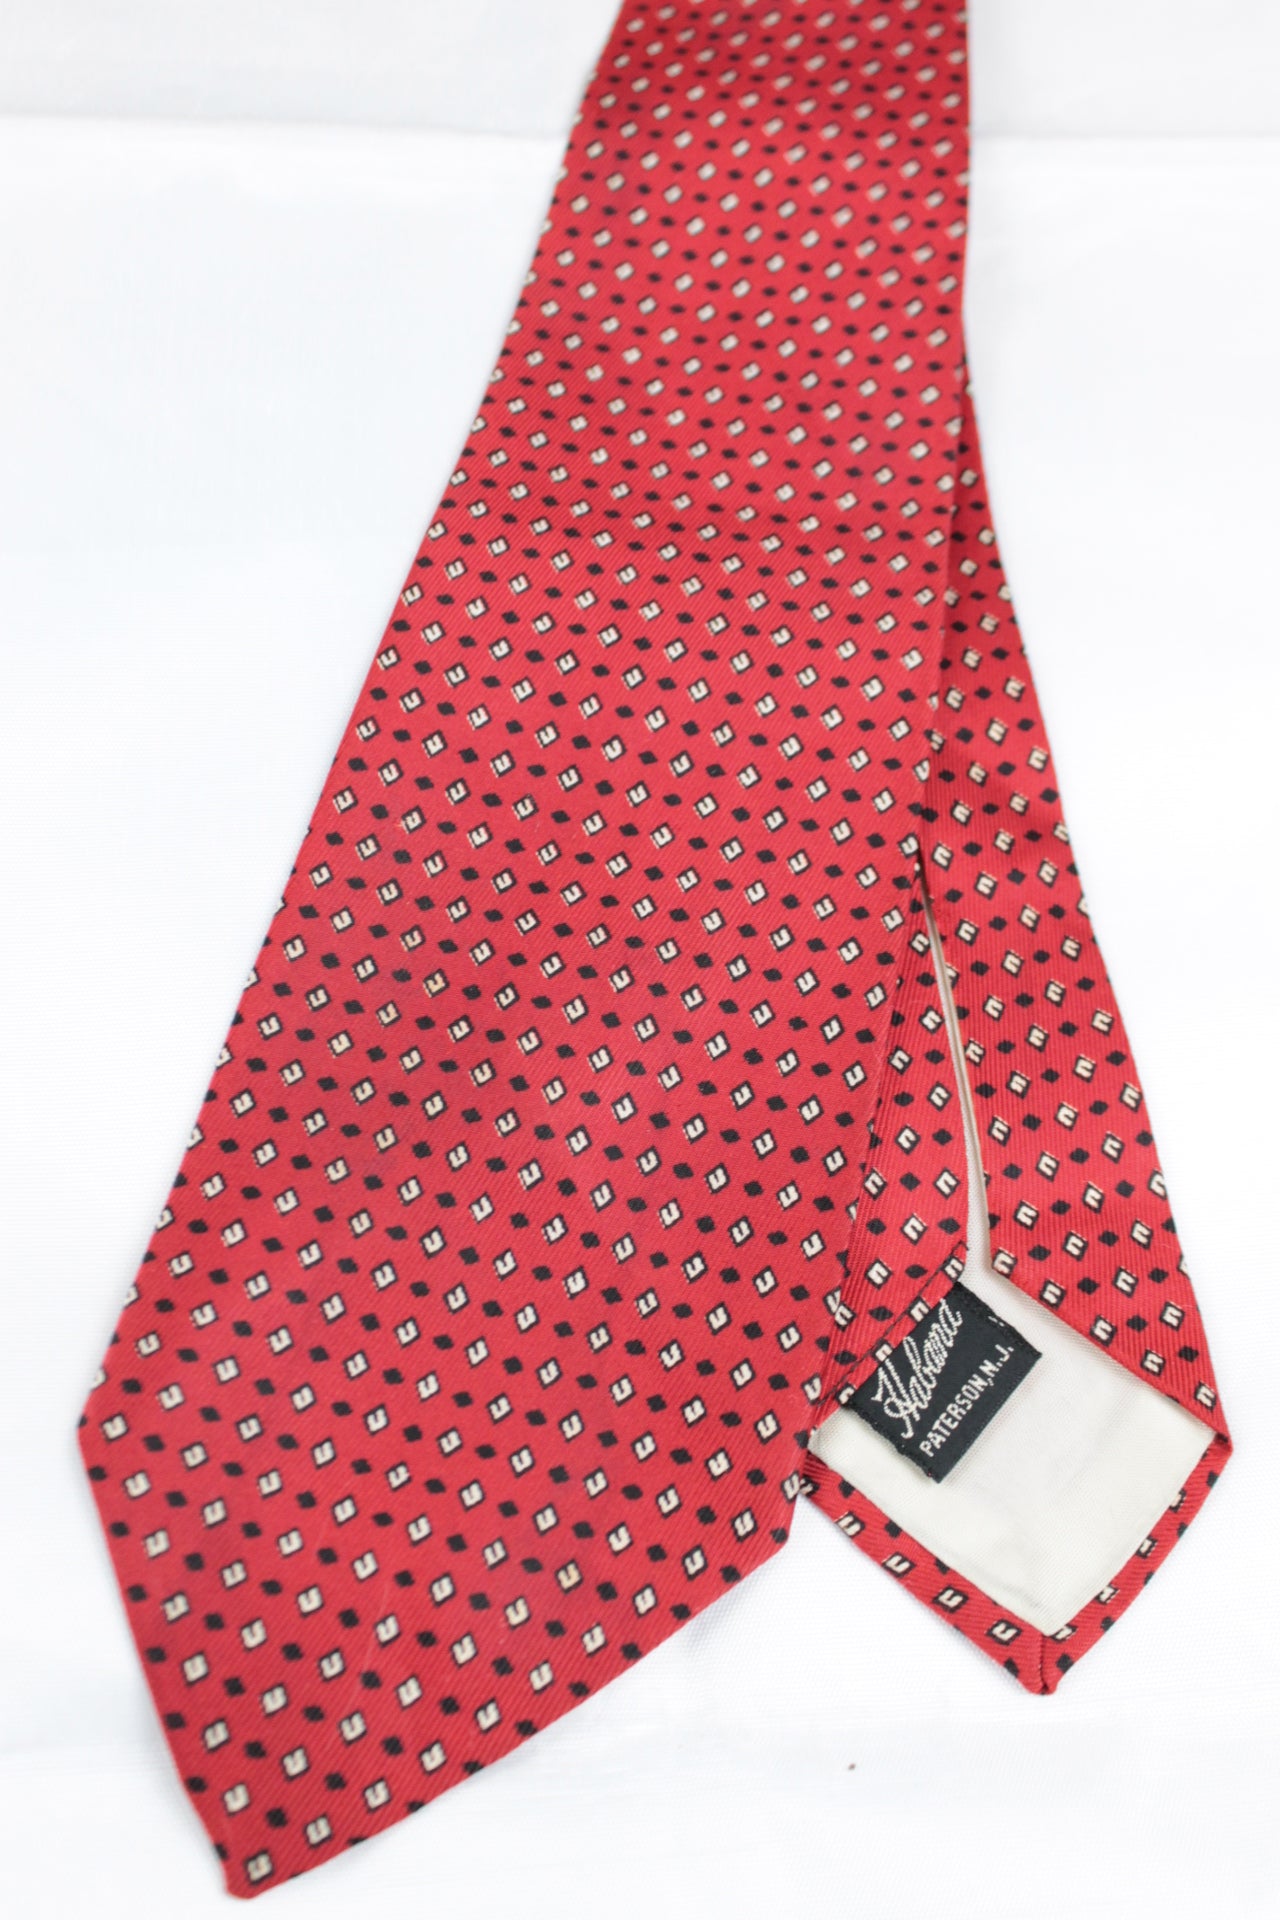 Vintage 1960s Haband Rose Red Diamond Polka Dots Pattern Swing Tie